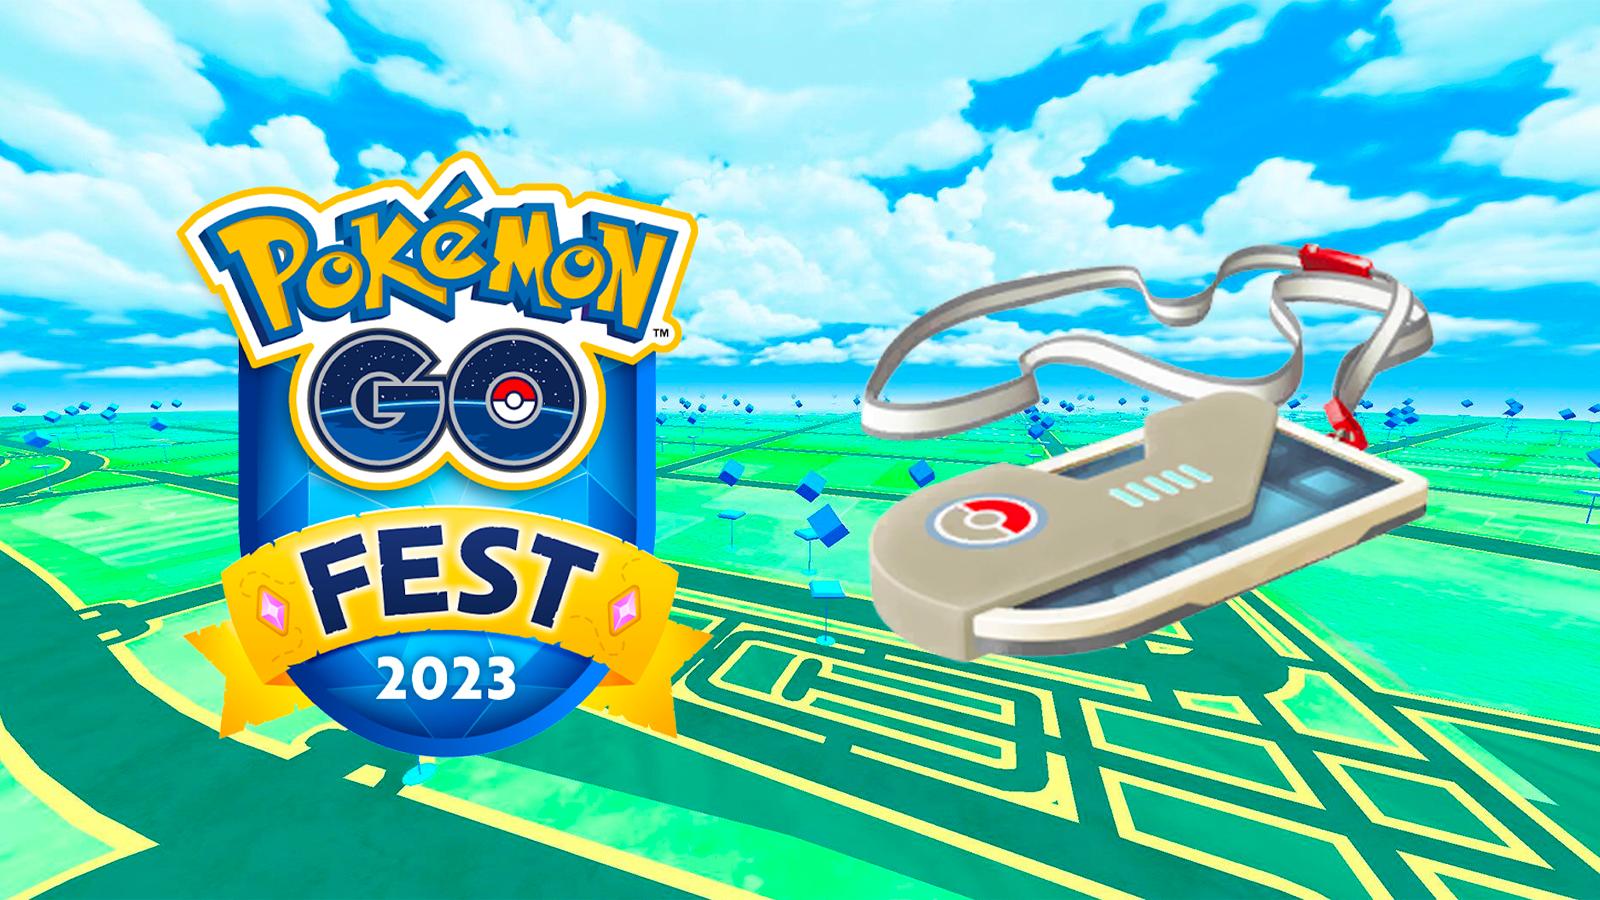 Can you trade Shiny Rayquaza with Go Fest 2023 location card in Pokemon GO?